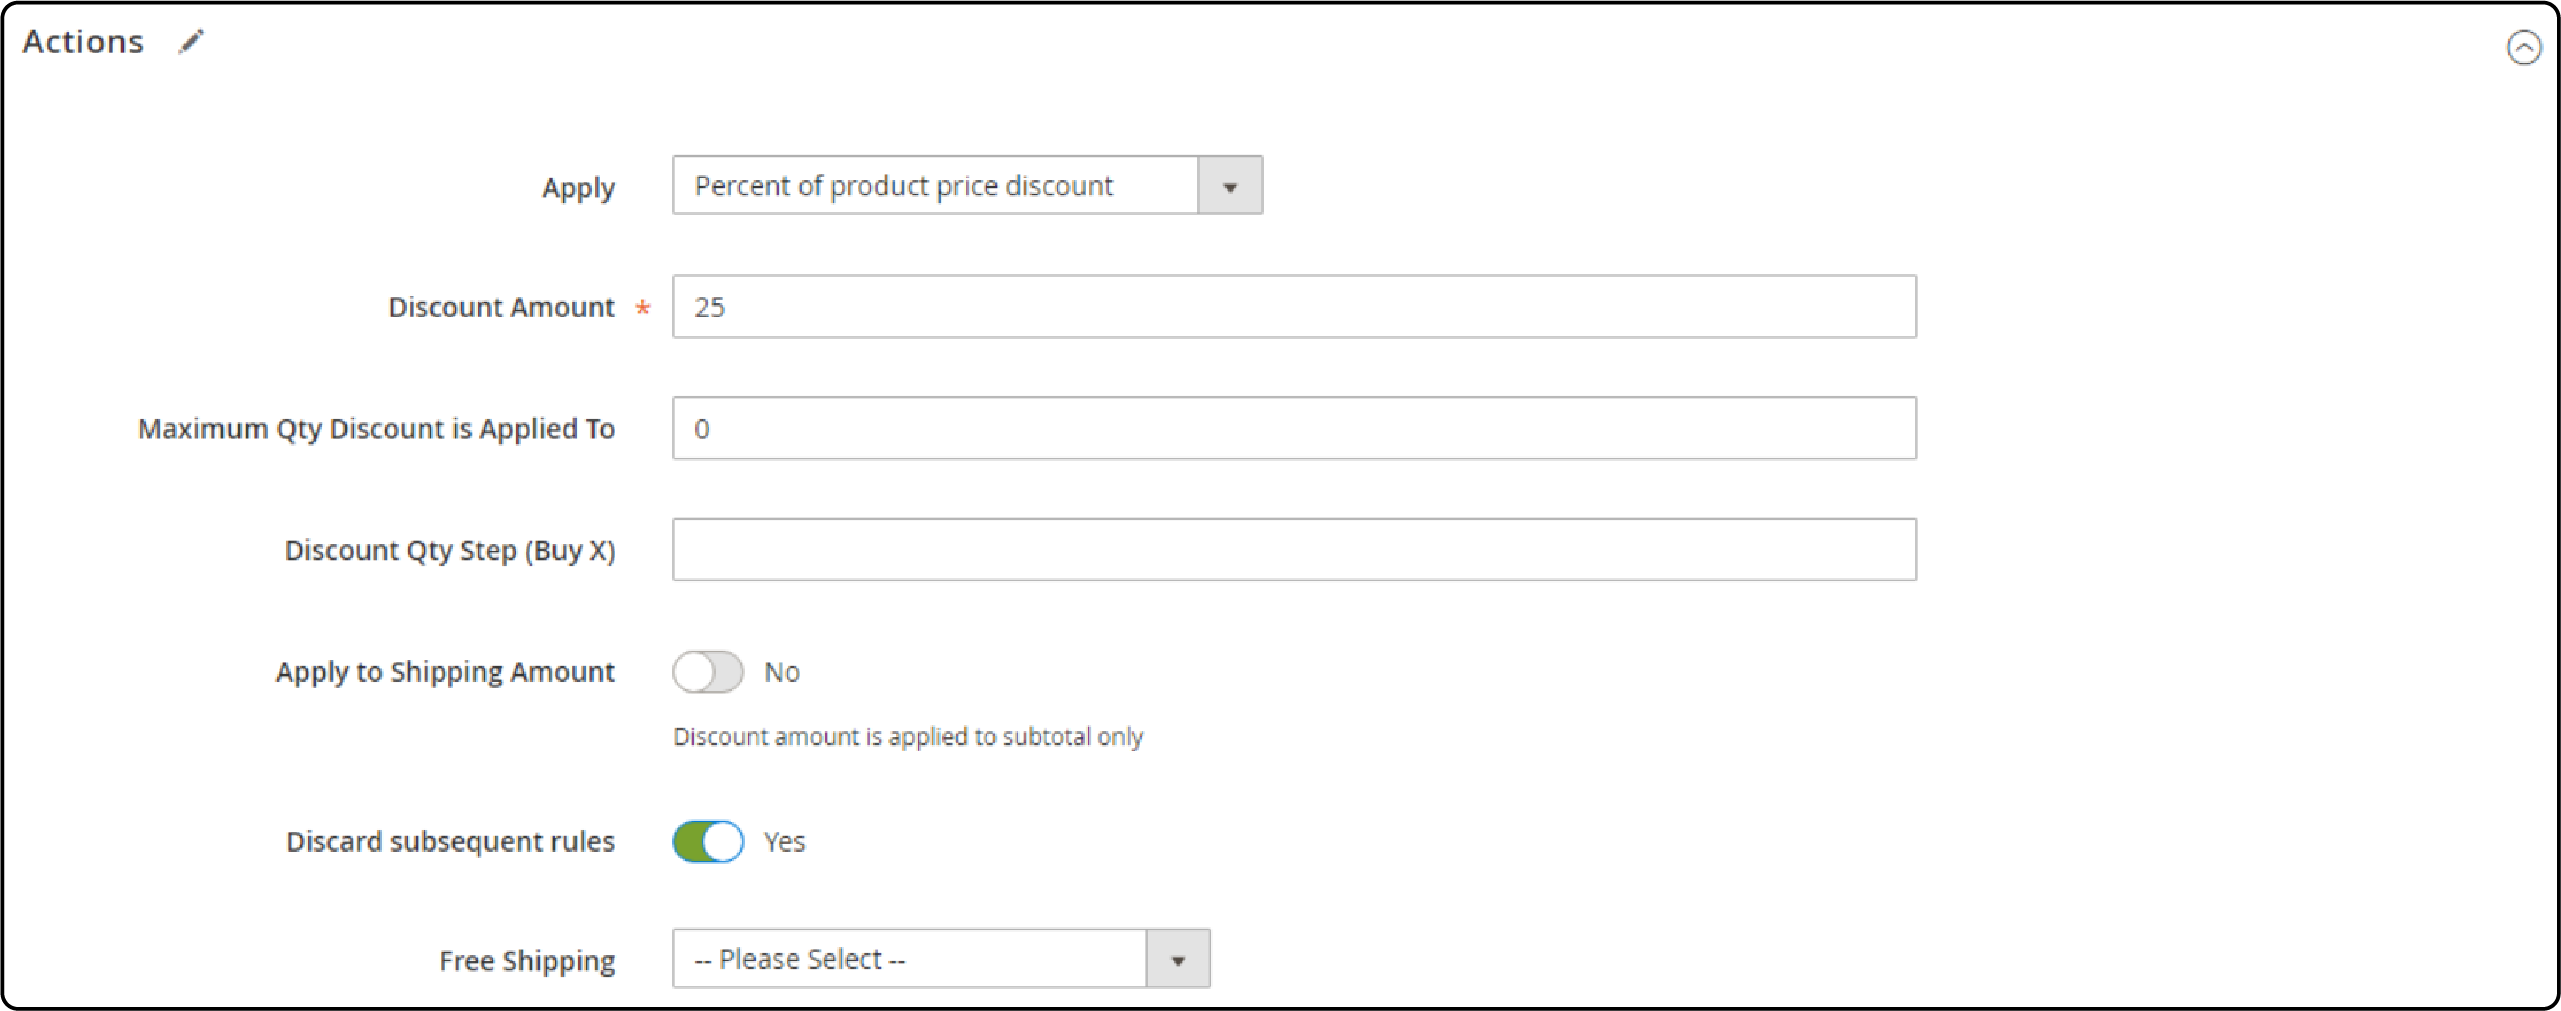 How to Expand the Actions section in Magento 2